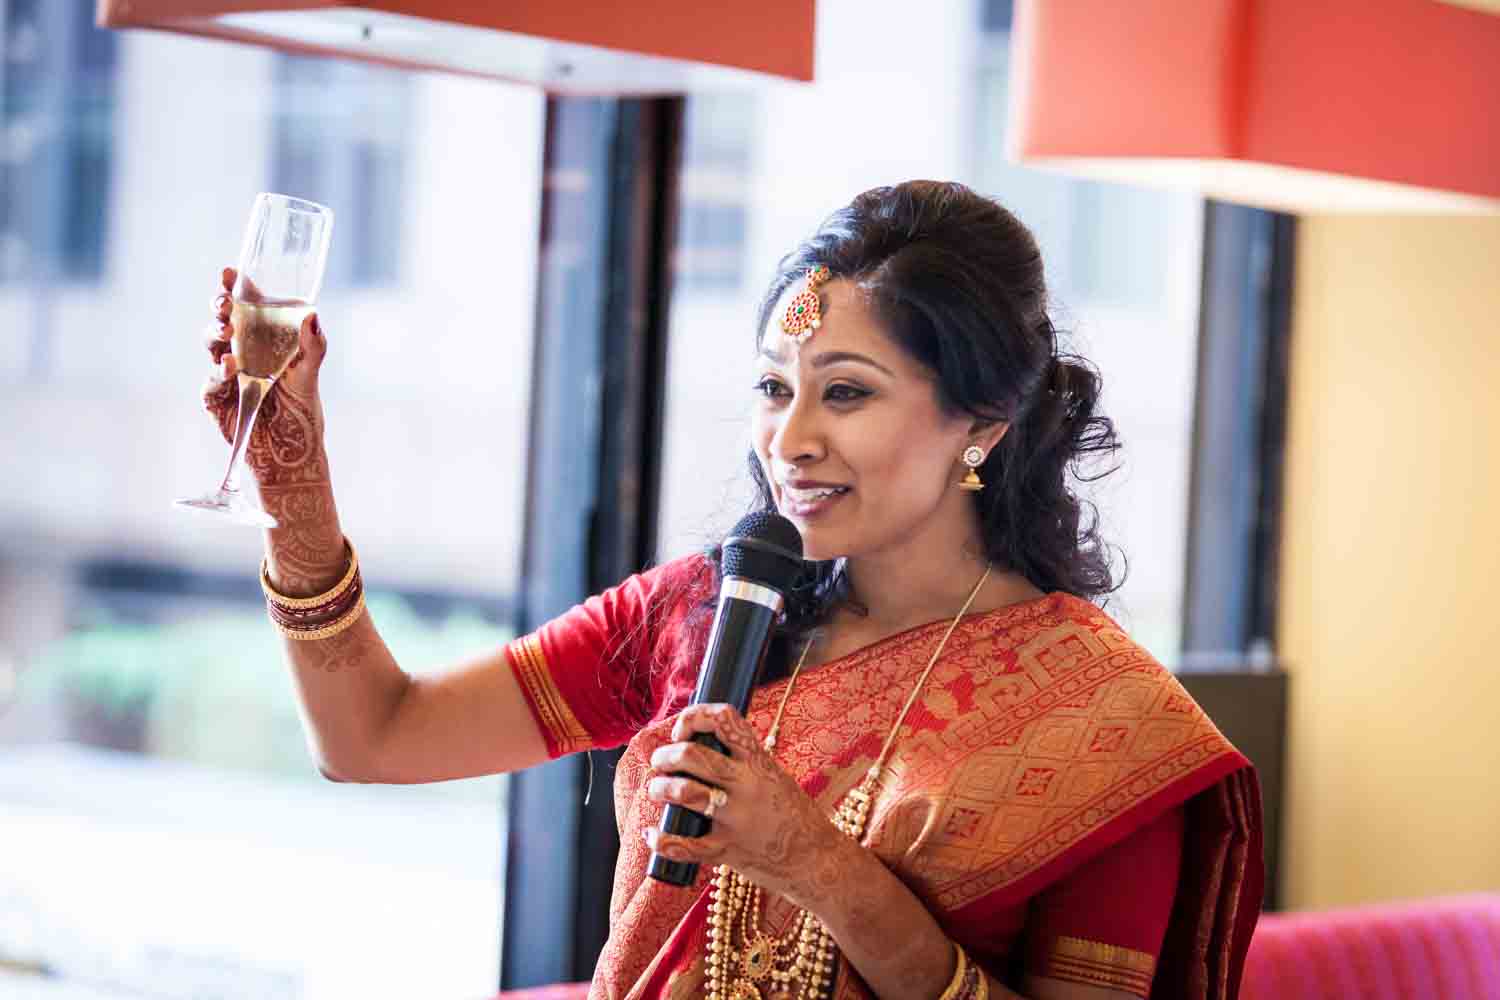 Indian bride in red sari holding up champagne glass at a NYC City Hall Indian wedding